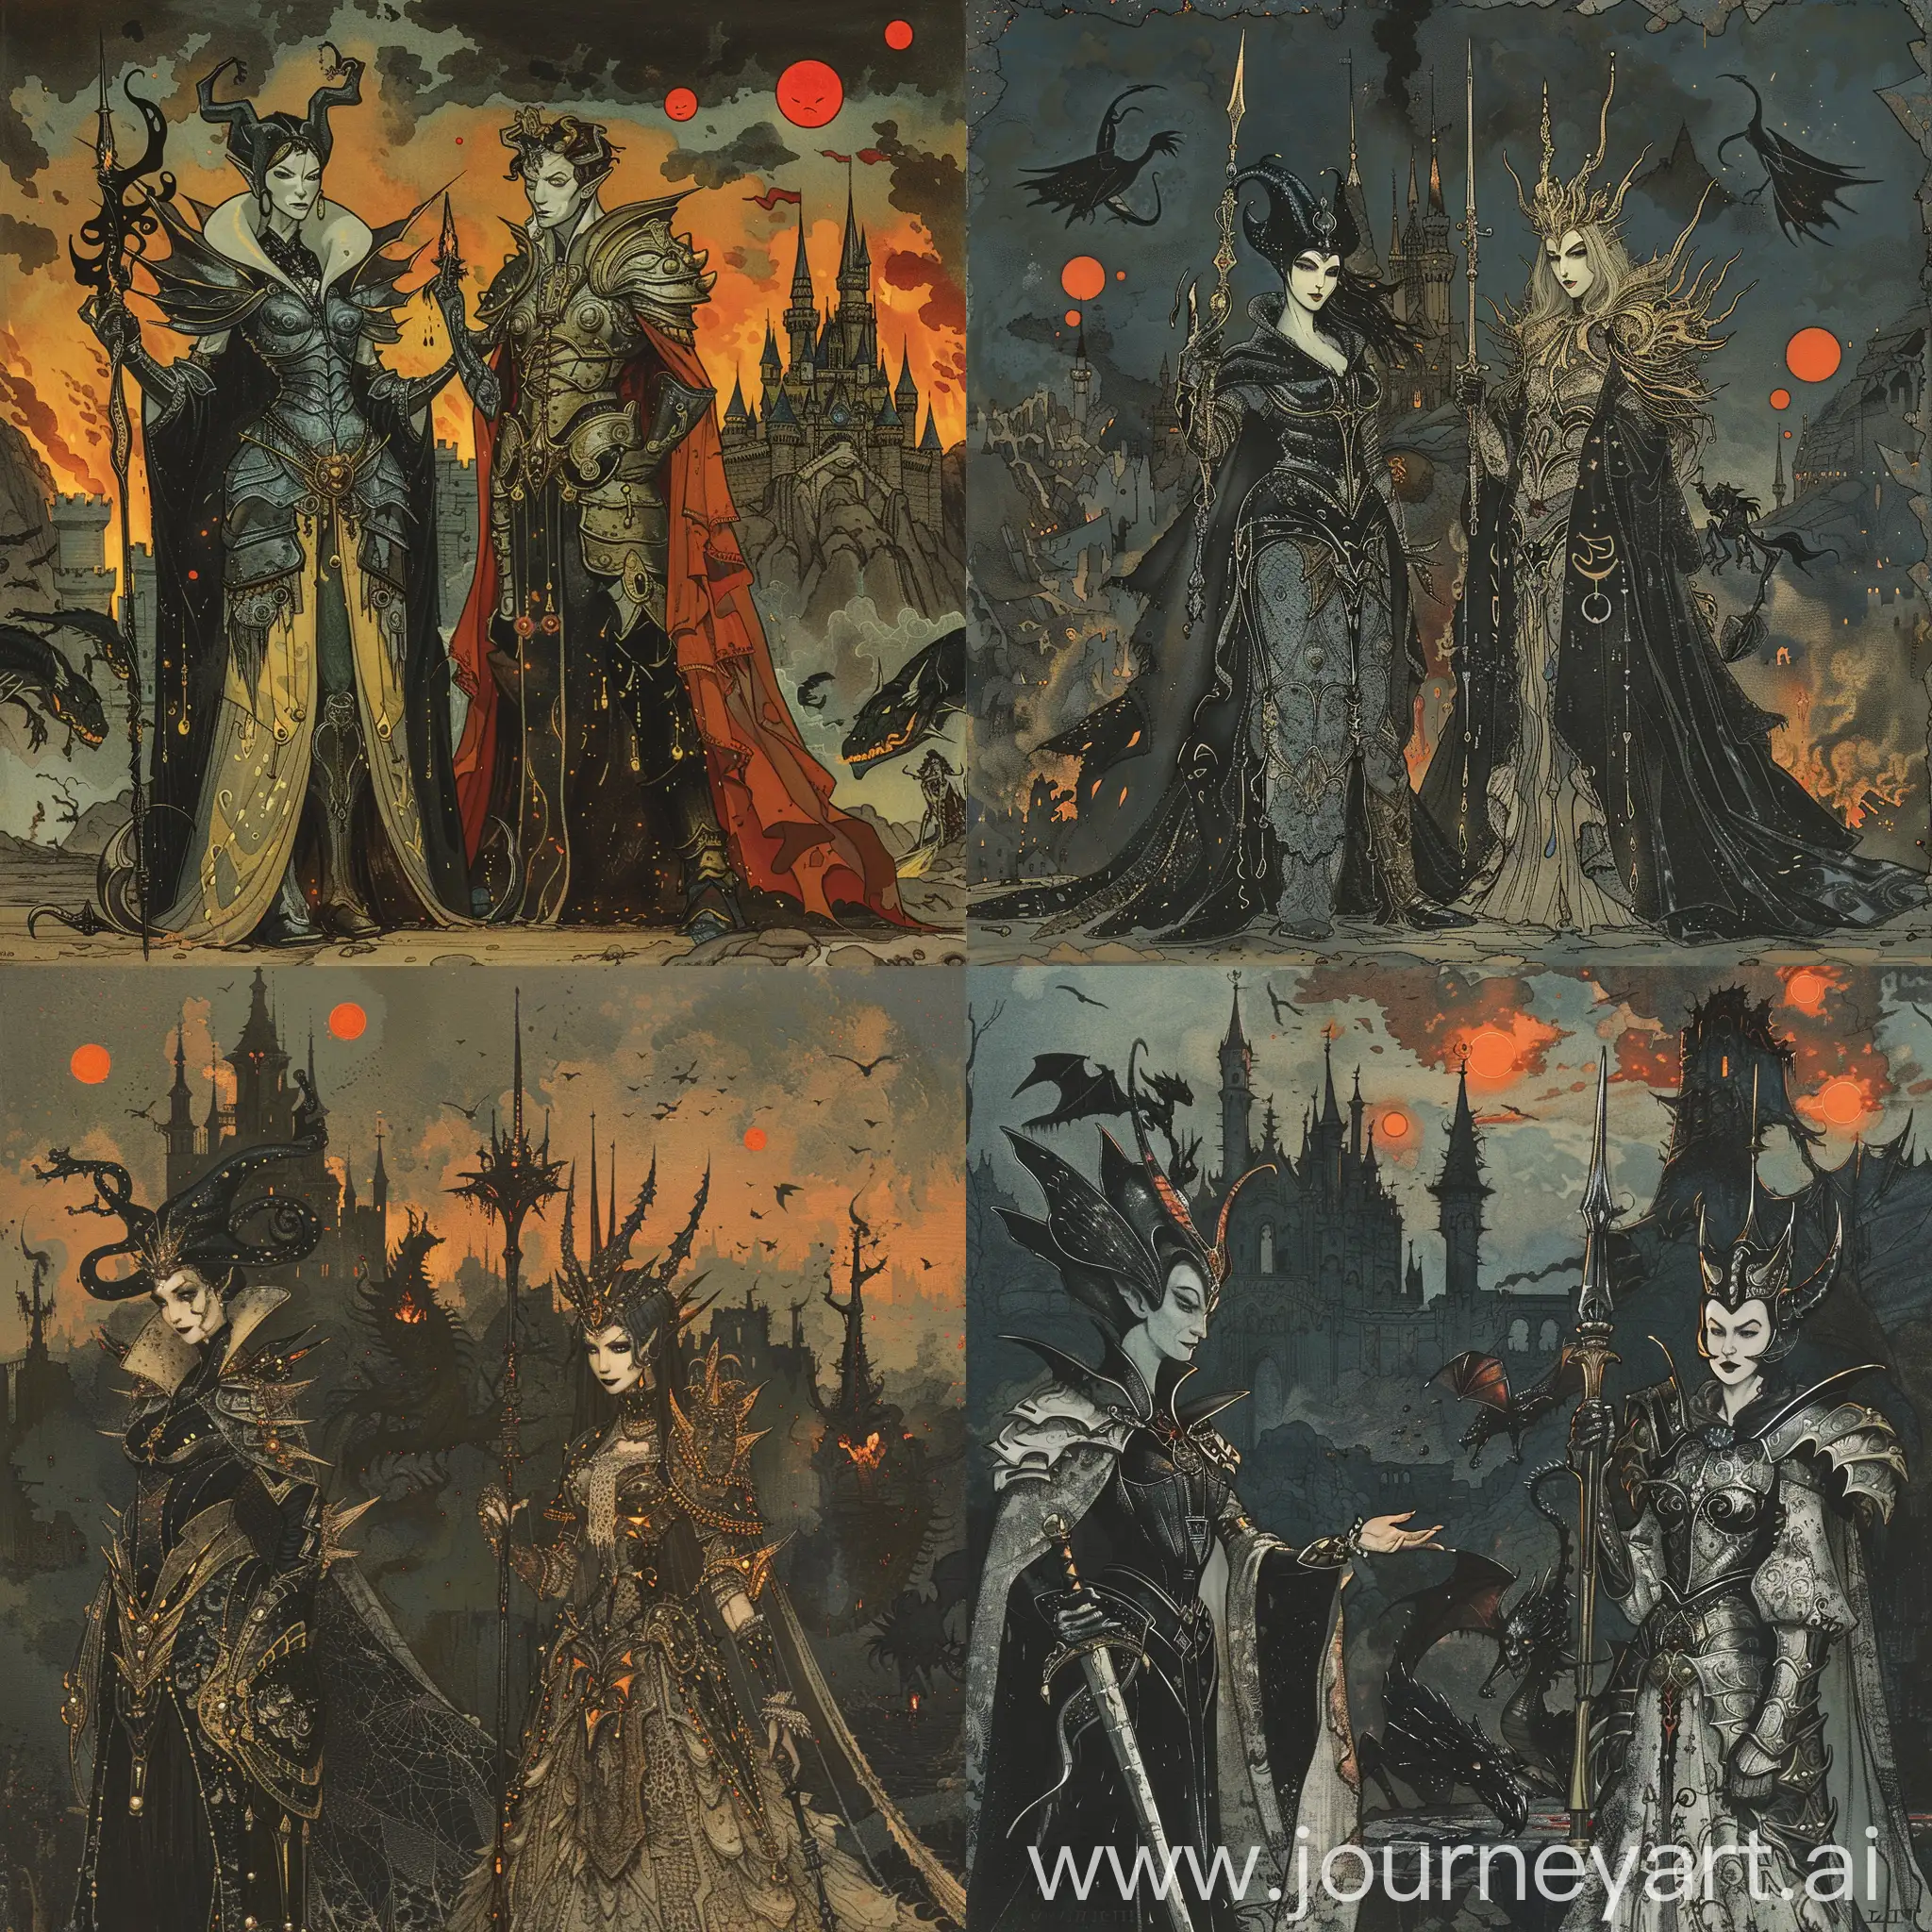 Mucha painting style:
two Disney villains,

at left, there is Maleficent with armor, and holds a black magic sword in the right hand.

at right, there is an Evil Queen with armor, who also holds a black magic sword in right hand.

They stand next to each other. The background is a creepy Disney castle under fire in ruin, far behind.

Small black dragons in the dark sky. Three small red sun in the dark sky.